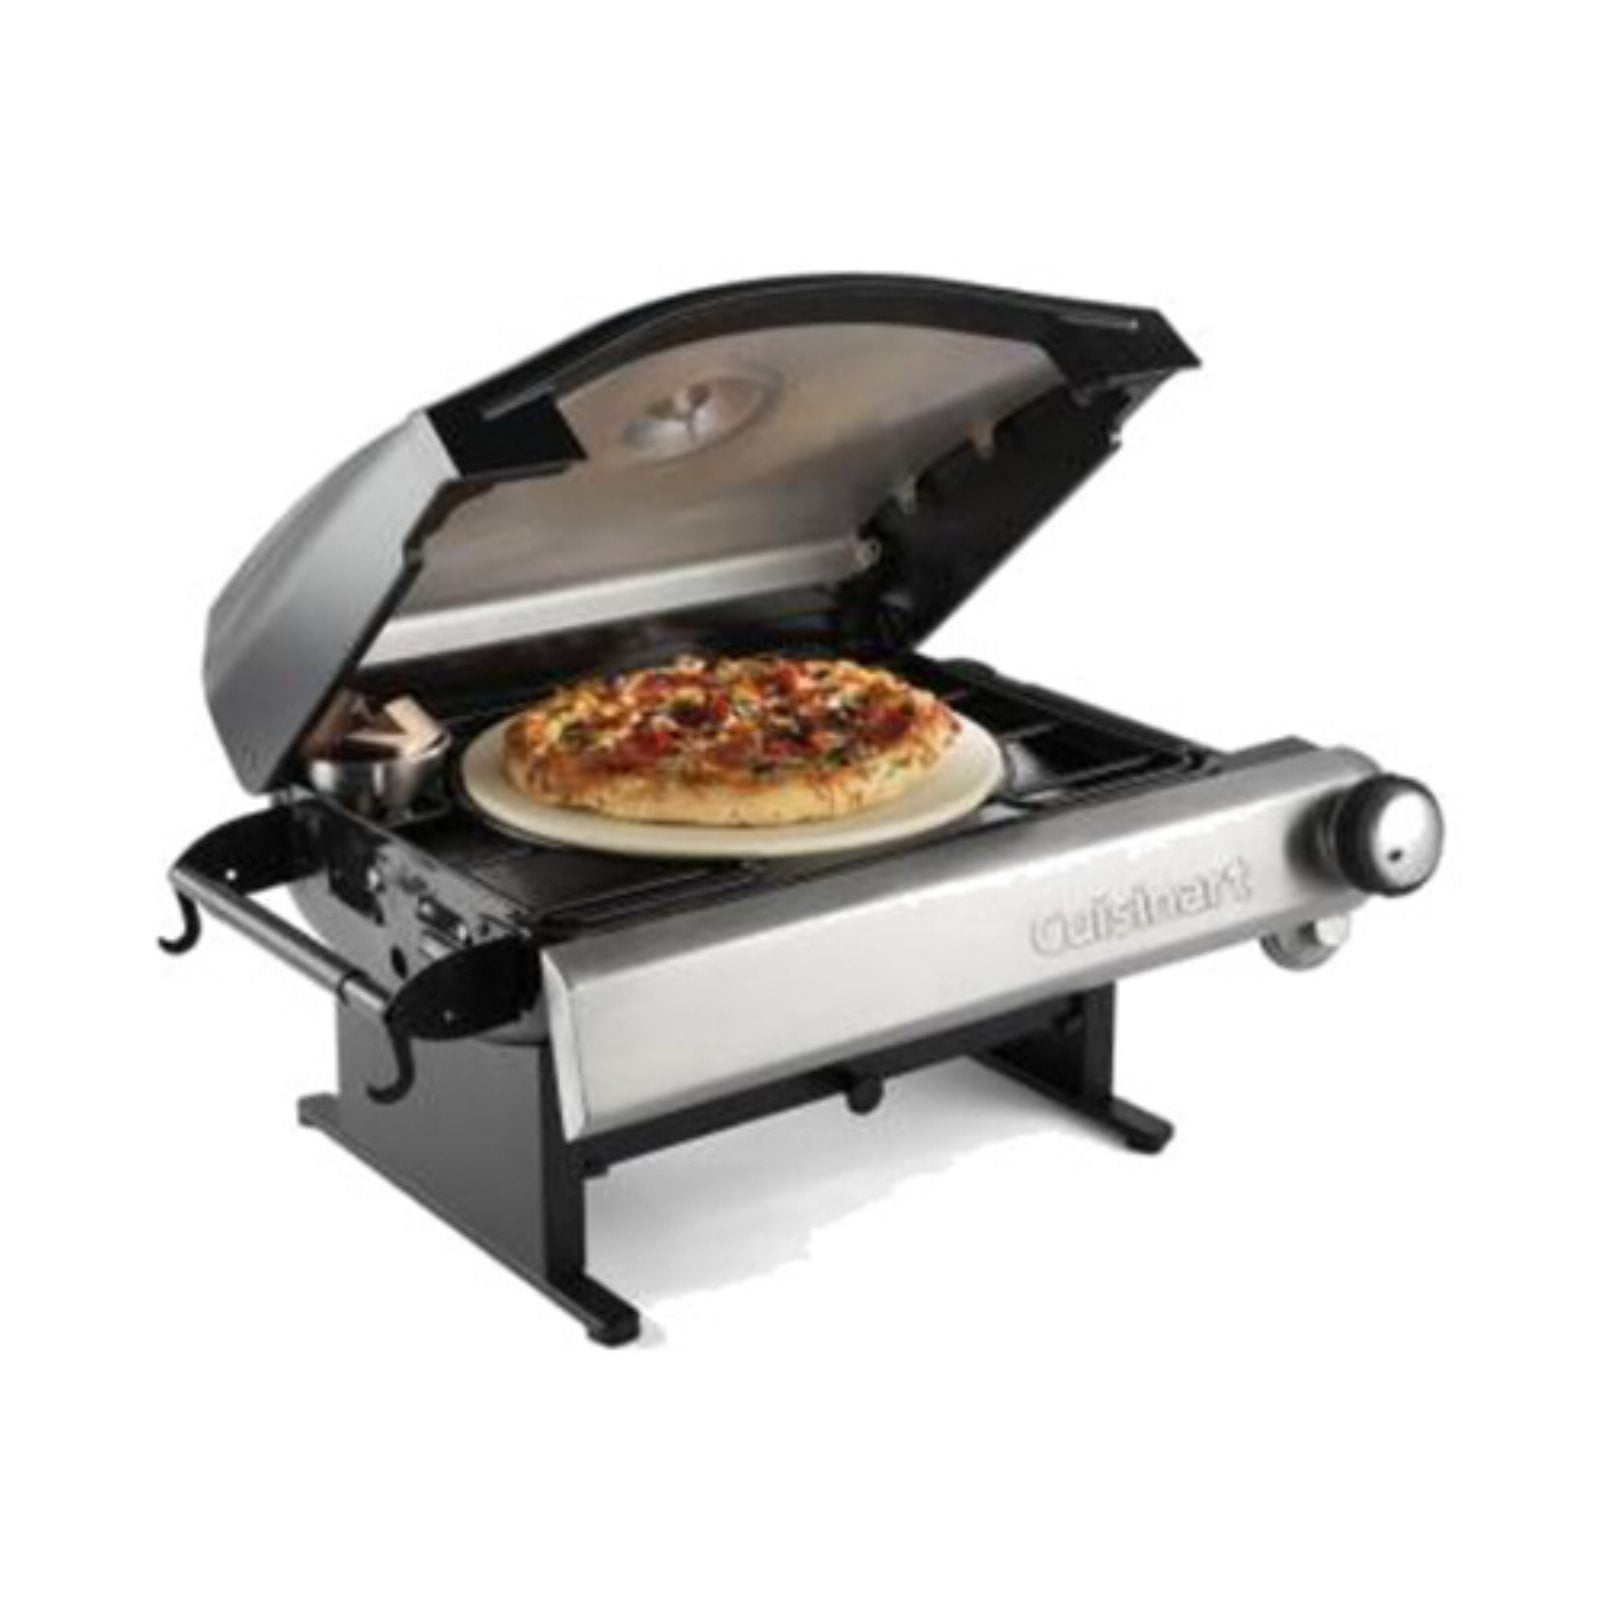 Alfrescamore Outdoor Pizza Oven with Accessories - Walmart.com